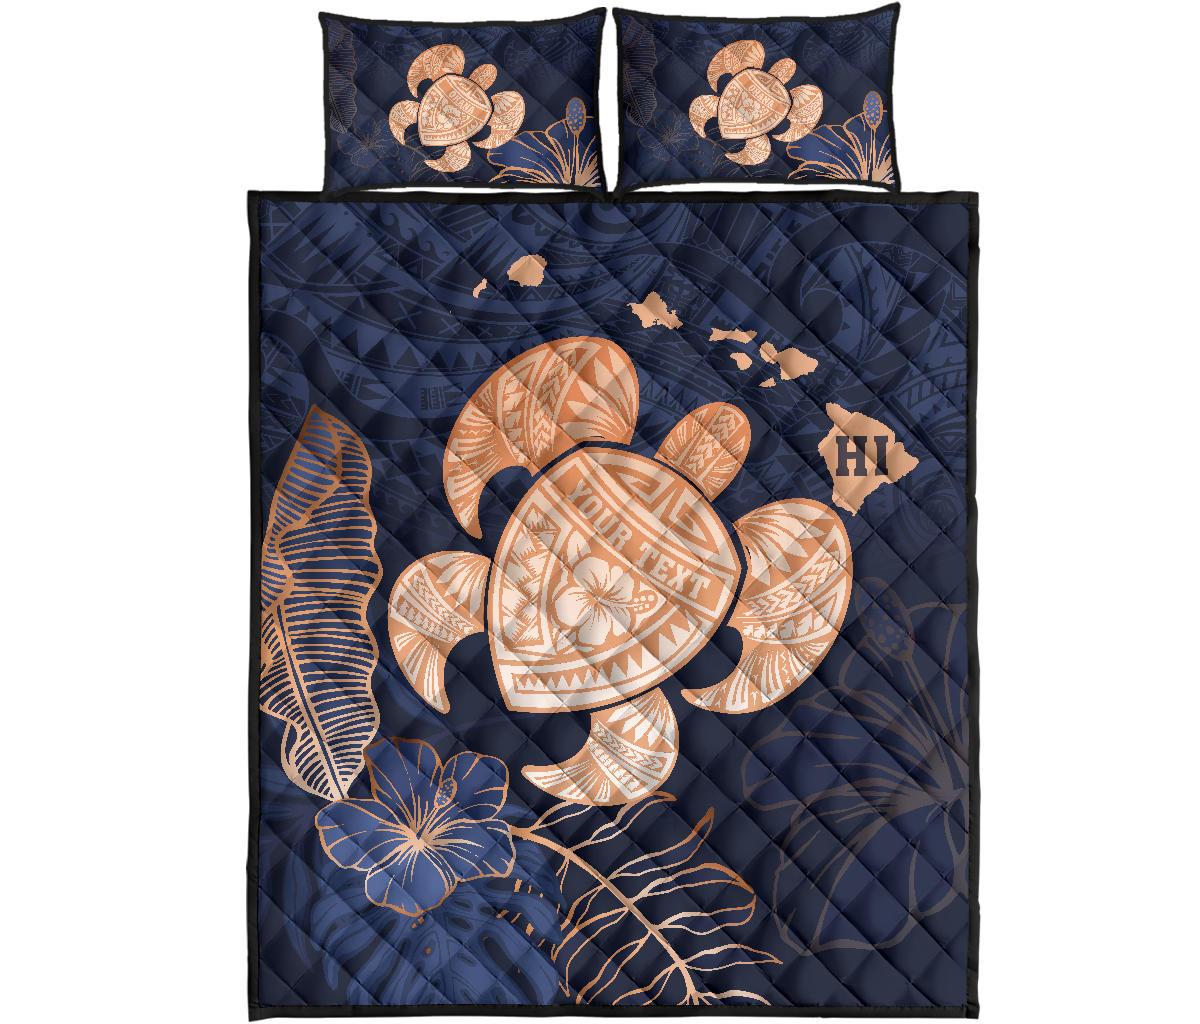 Personalized - Hawaii Polynesian Turtle Map Hibiscus Tropical Quilt Bed Set - Indigo Blue - Polynesian Pride